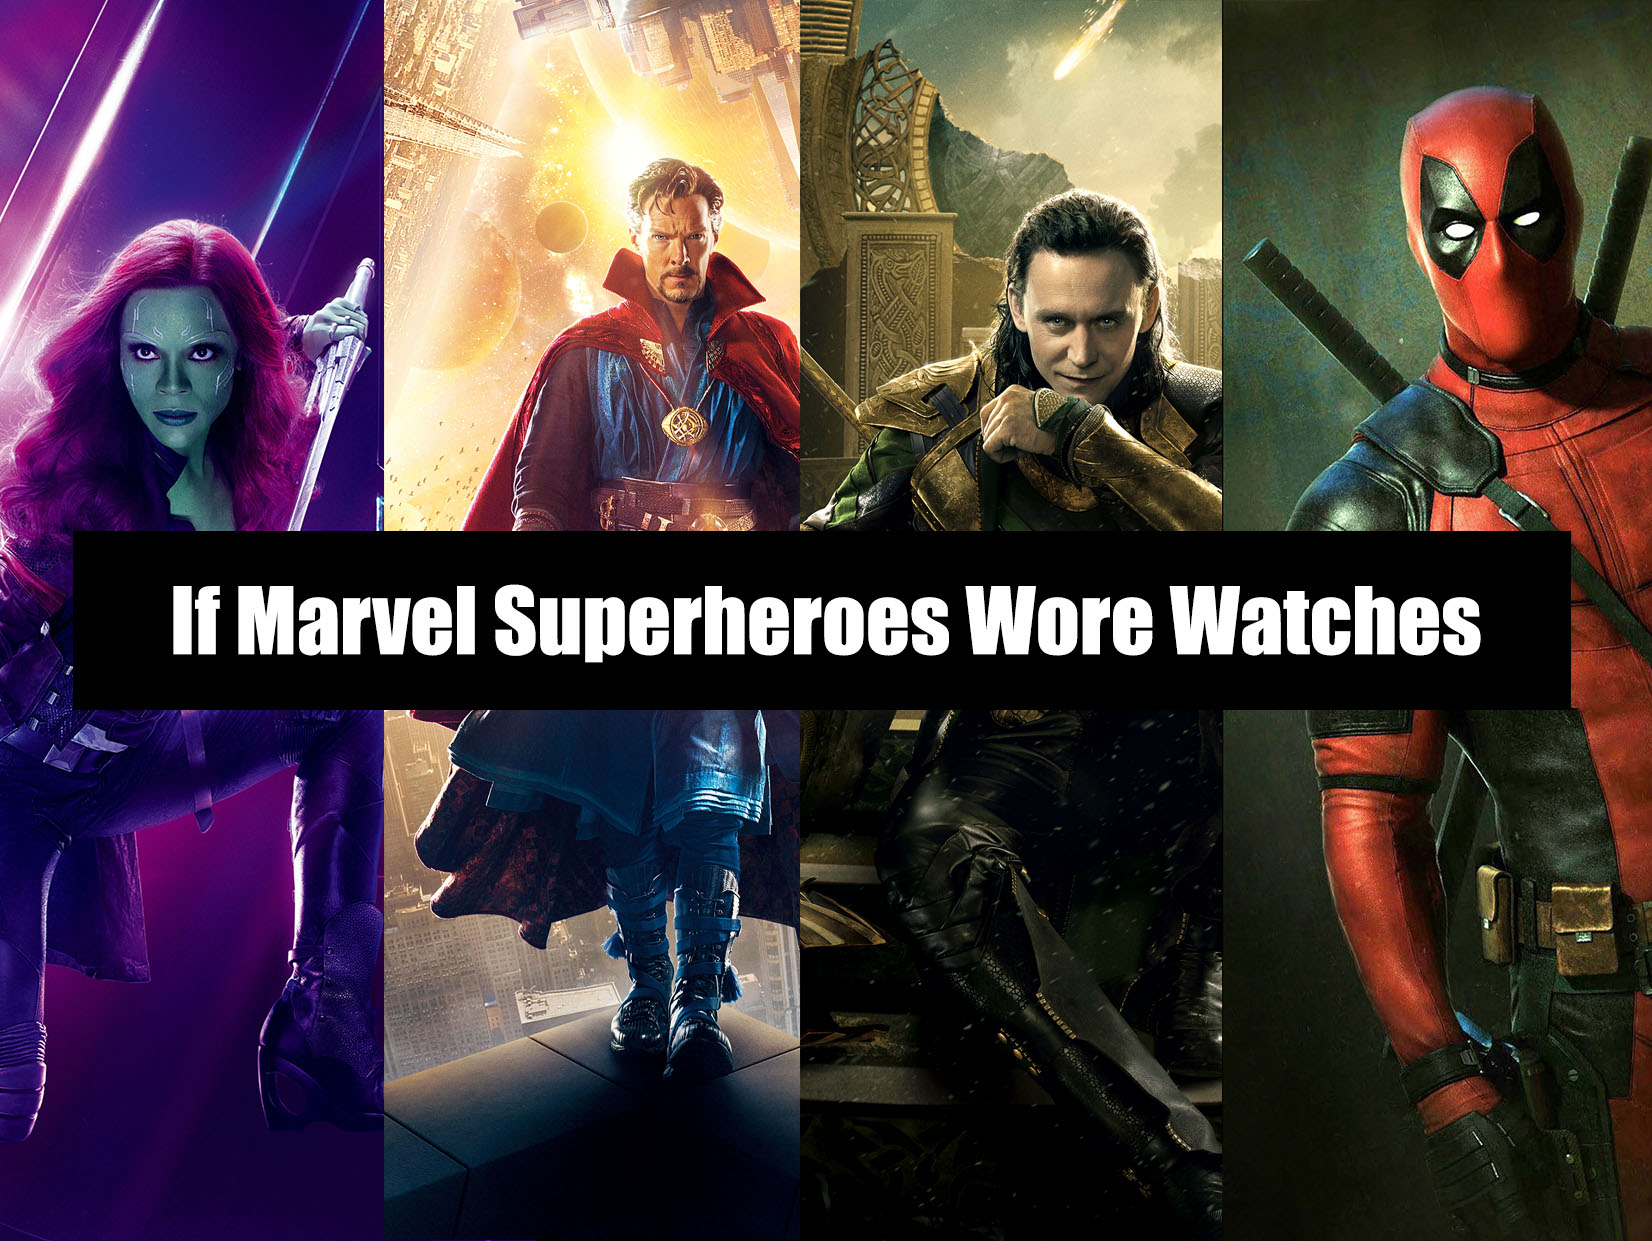 If Marvel Superheroes Wore Watches